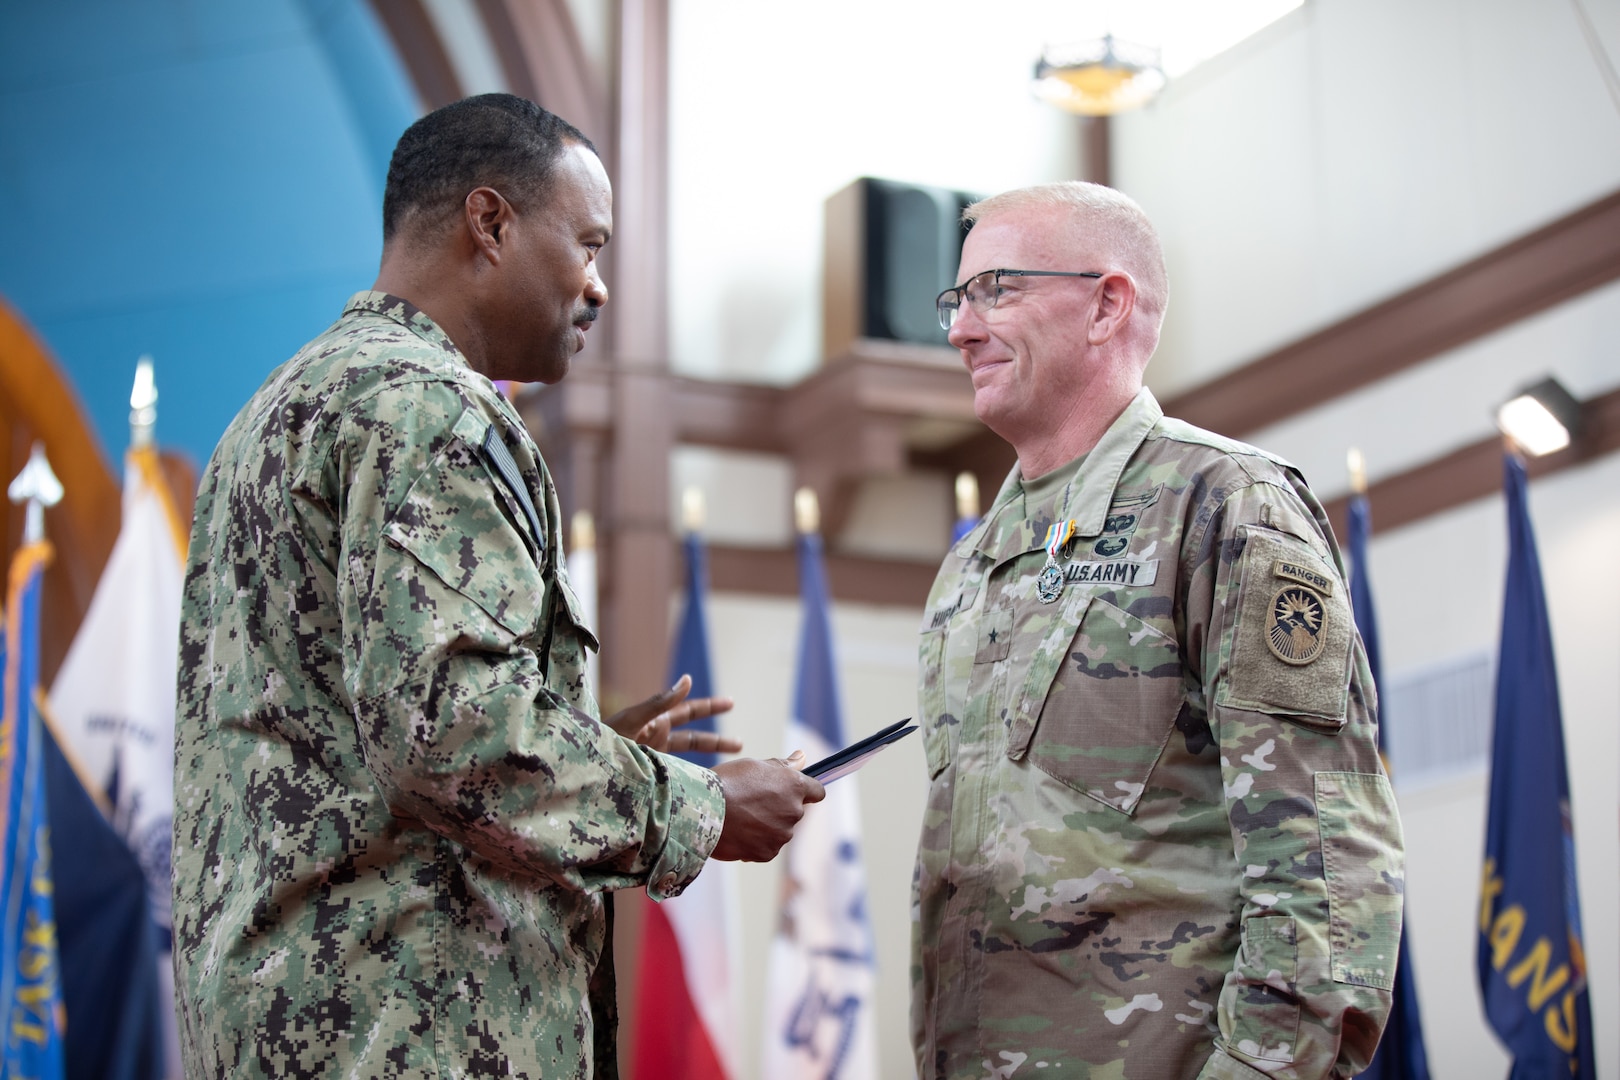 U.S. Army Brig. Gen. Scott Hiipakka relinquished command of Joint Task Force Guantanamo (JTF-GTMO) to U.S. Army Col. Matthew Jemmott, during a ceremony on June 20, 2023, at Naval Station Guantanamo Bay.